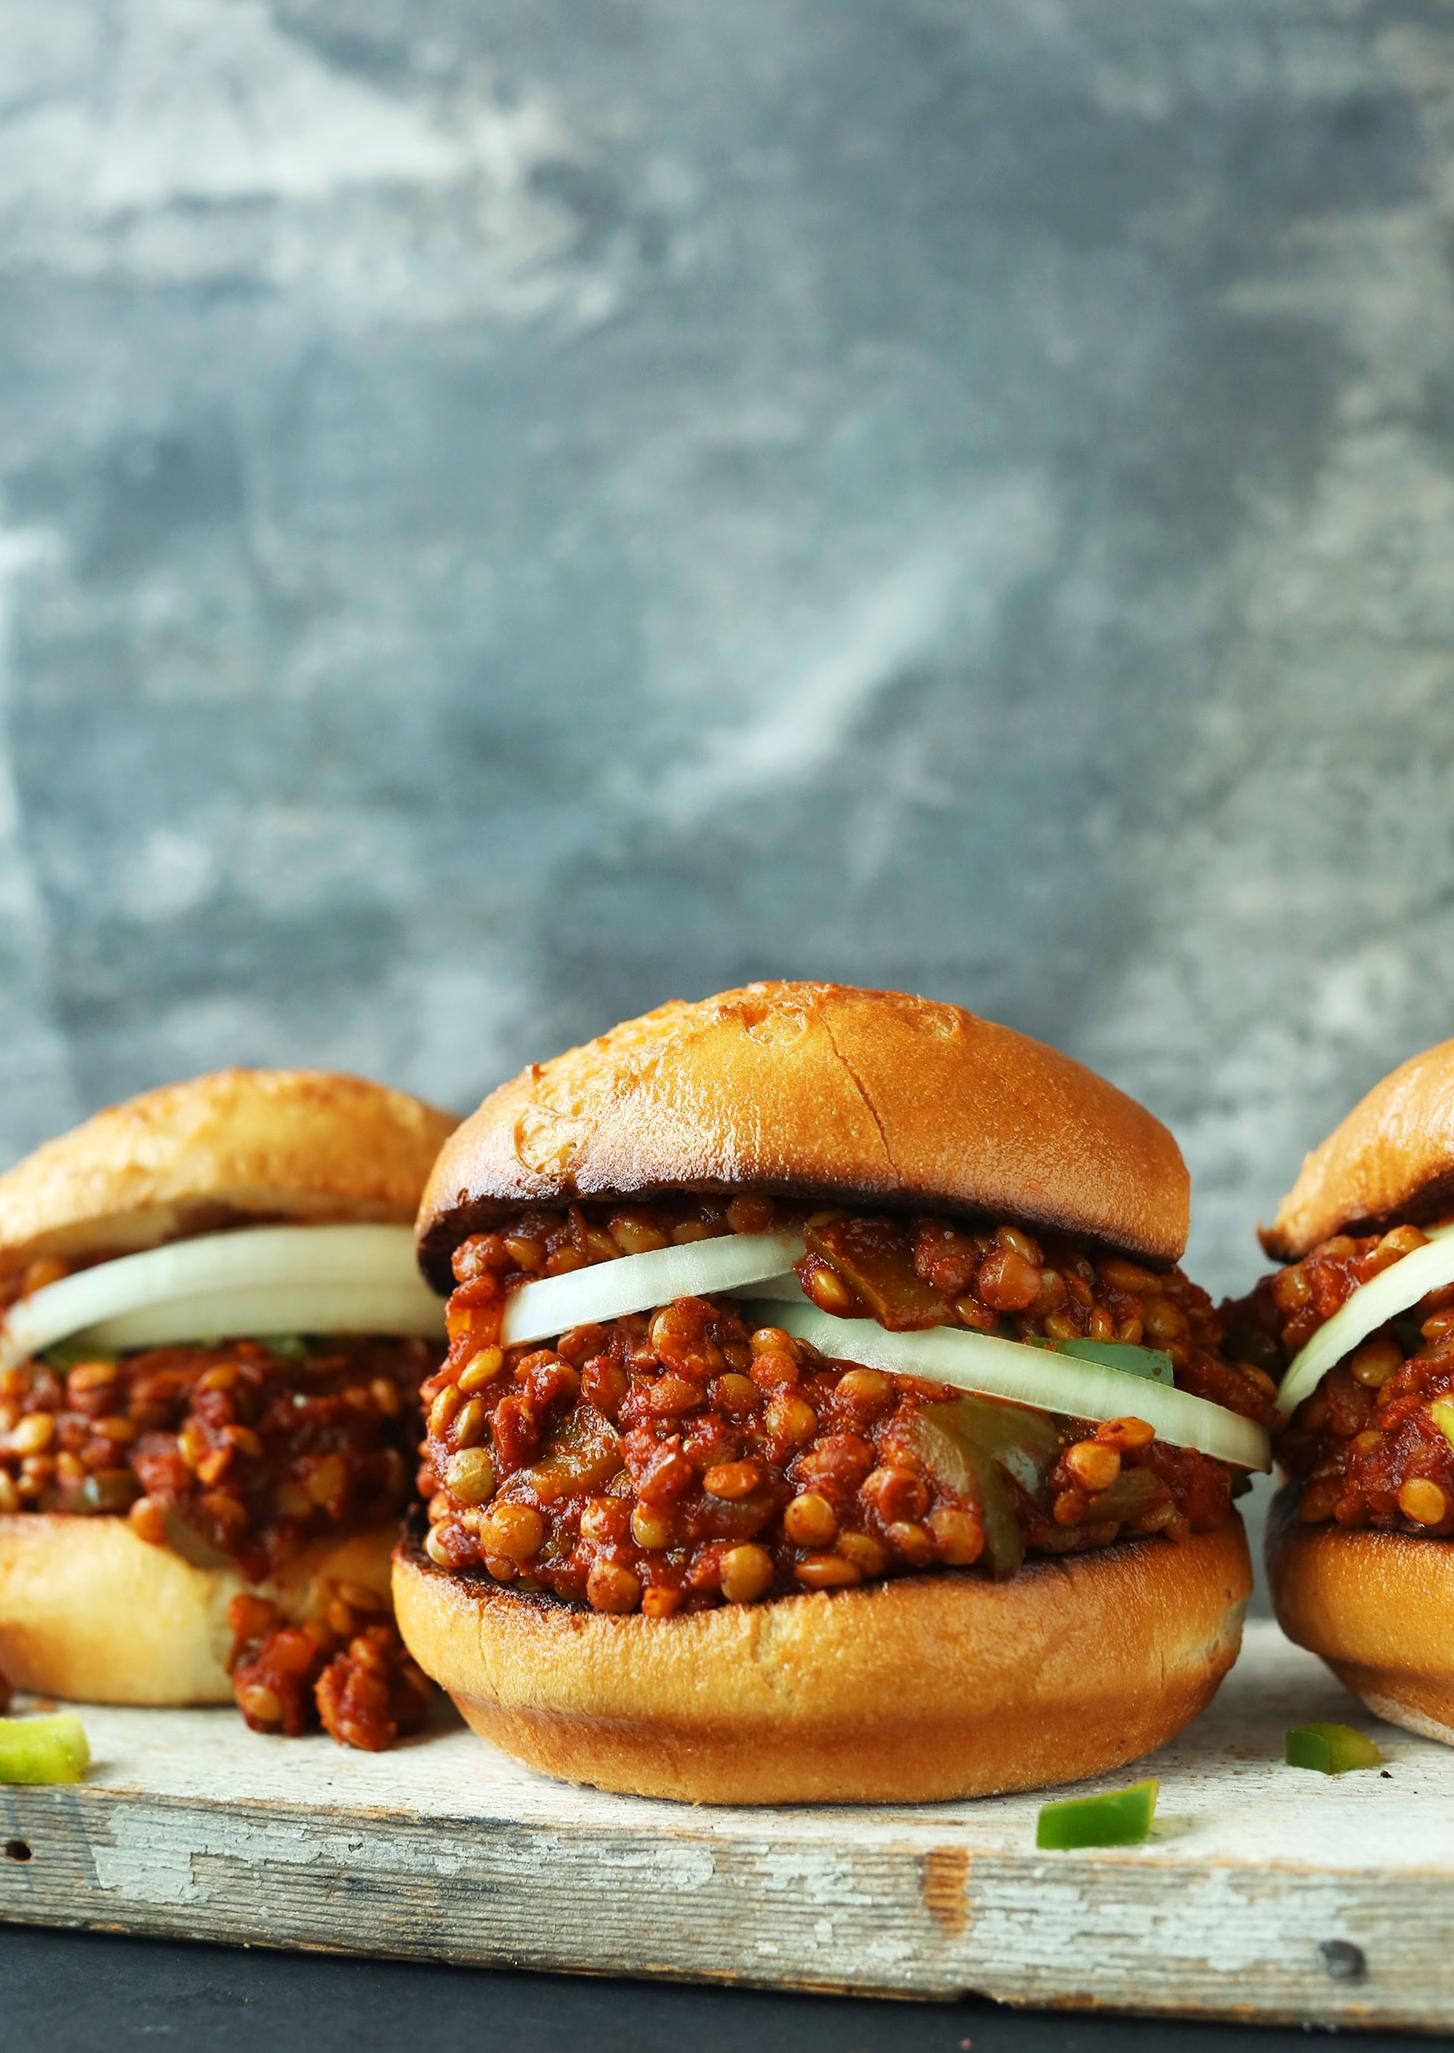  Get your hands messy with these delicious vegetarian BBQ Sloppy Joes!